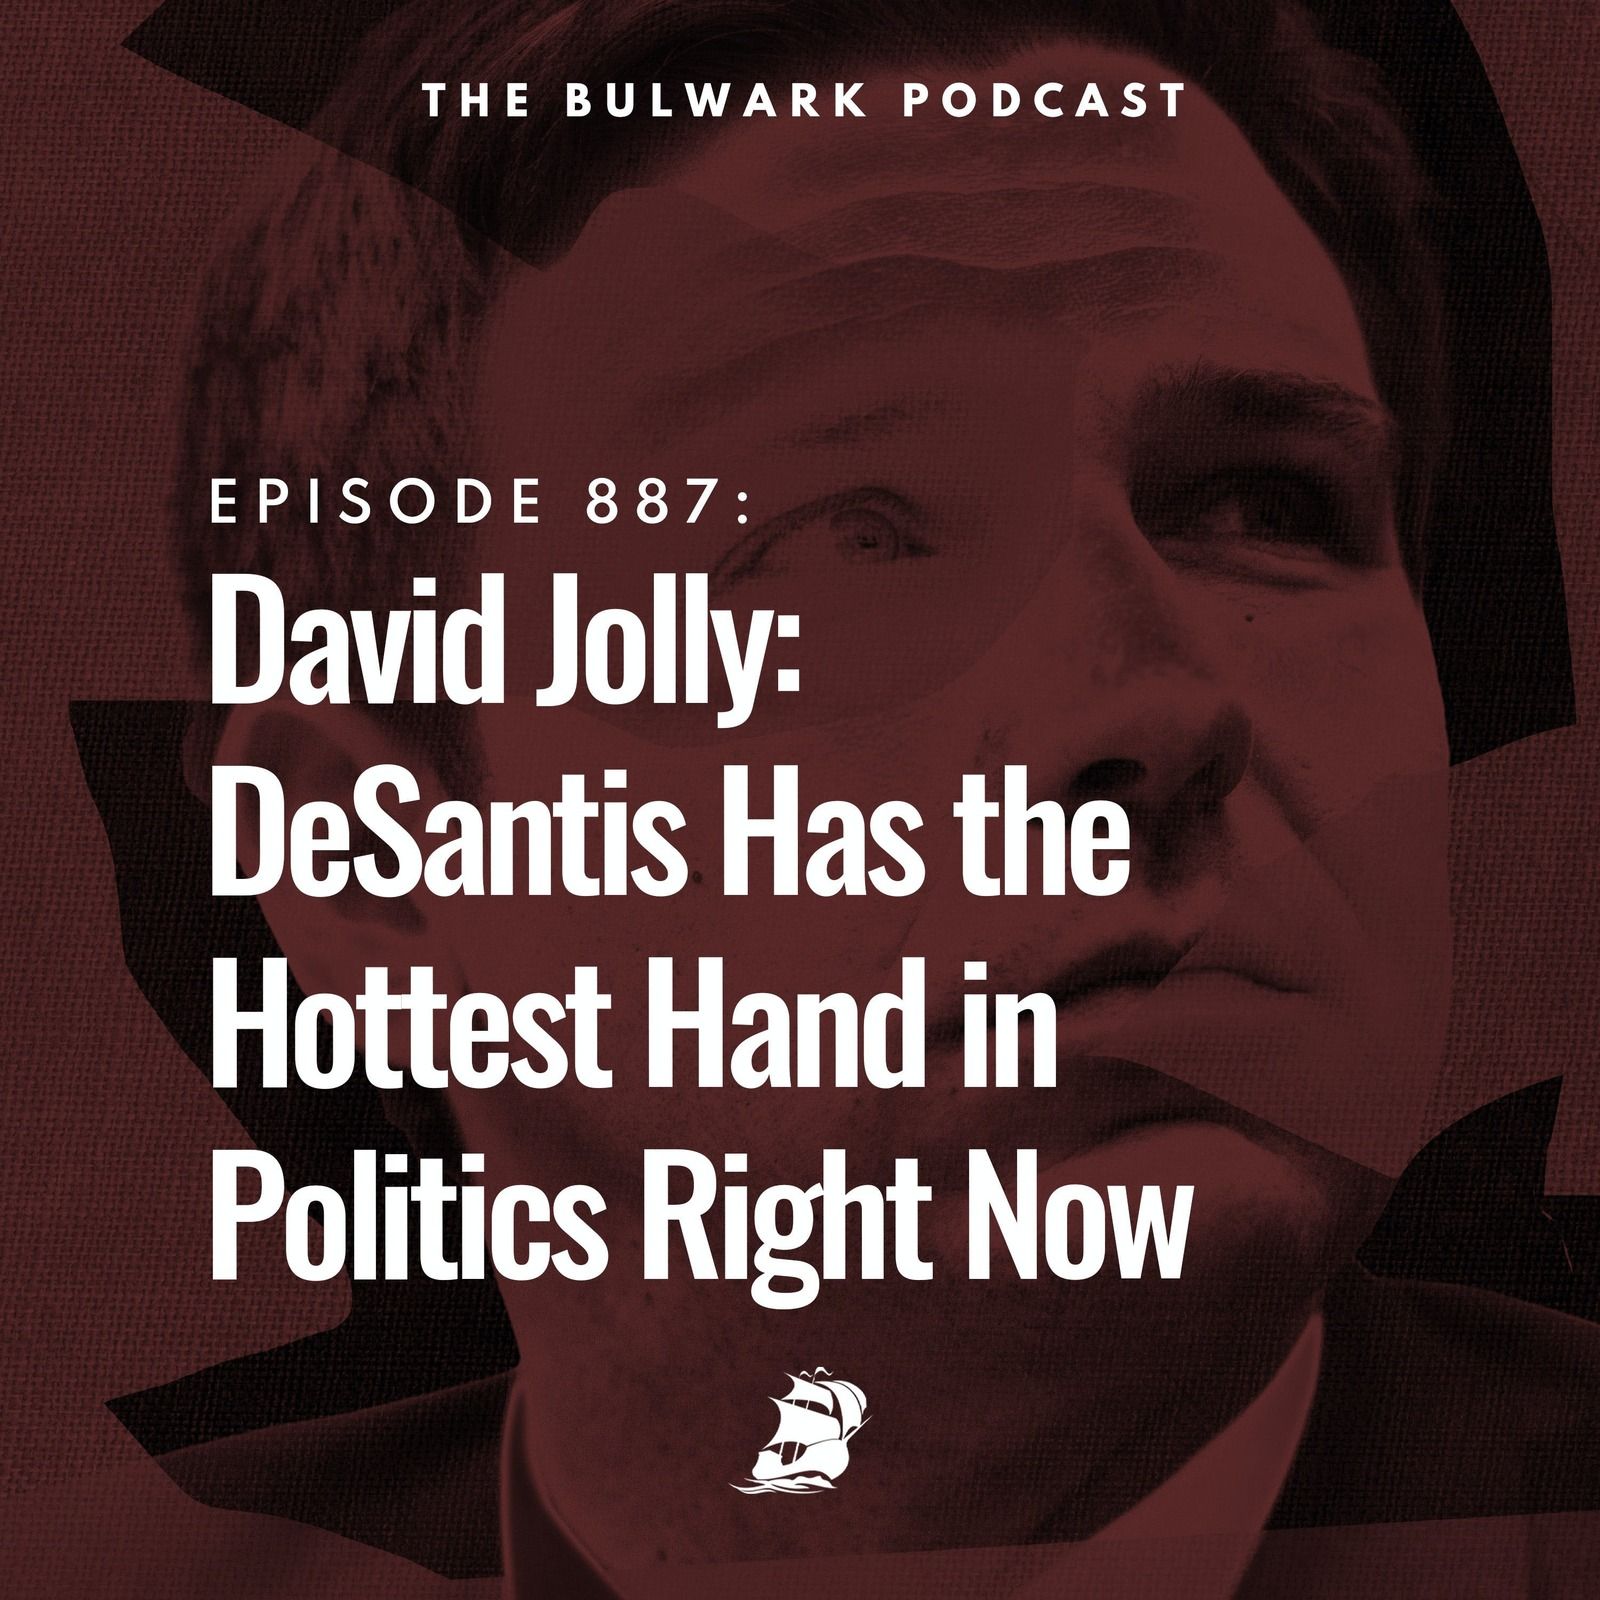 David Jolly: DeSantis Has the Hottest Hand in Politics Right Now by The Bulwark Podcast